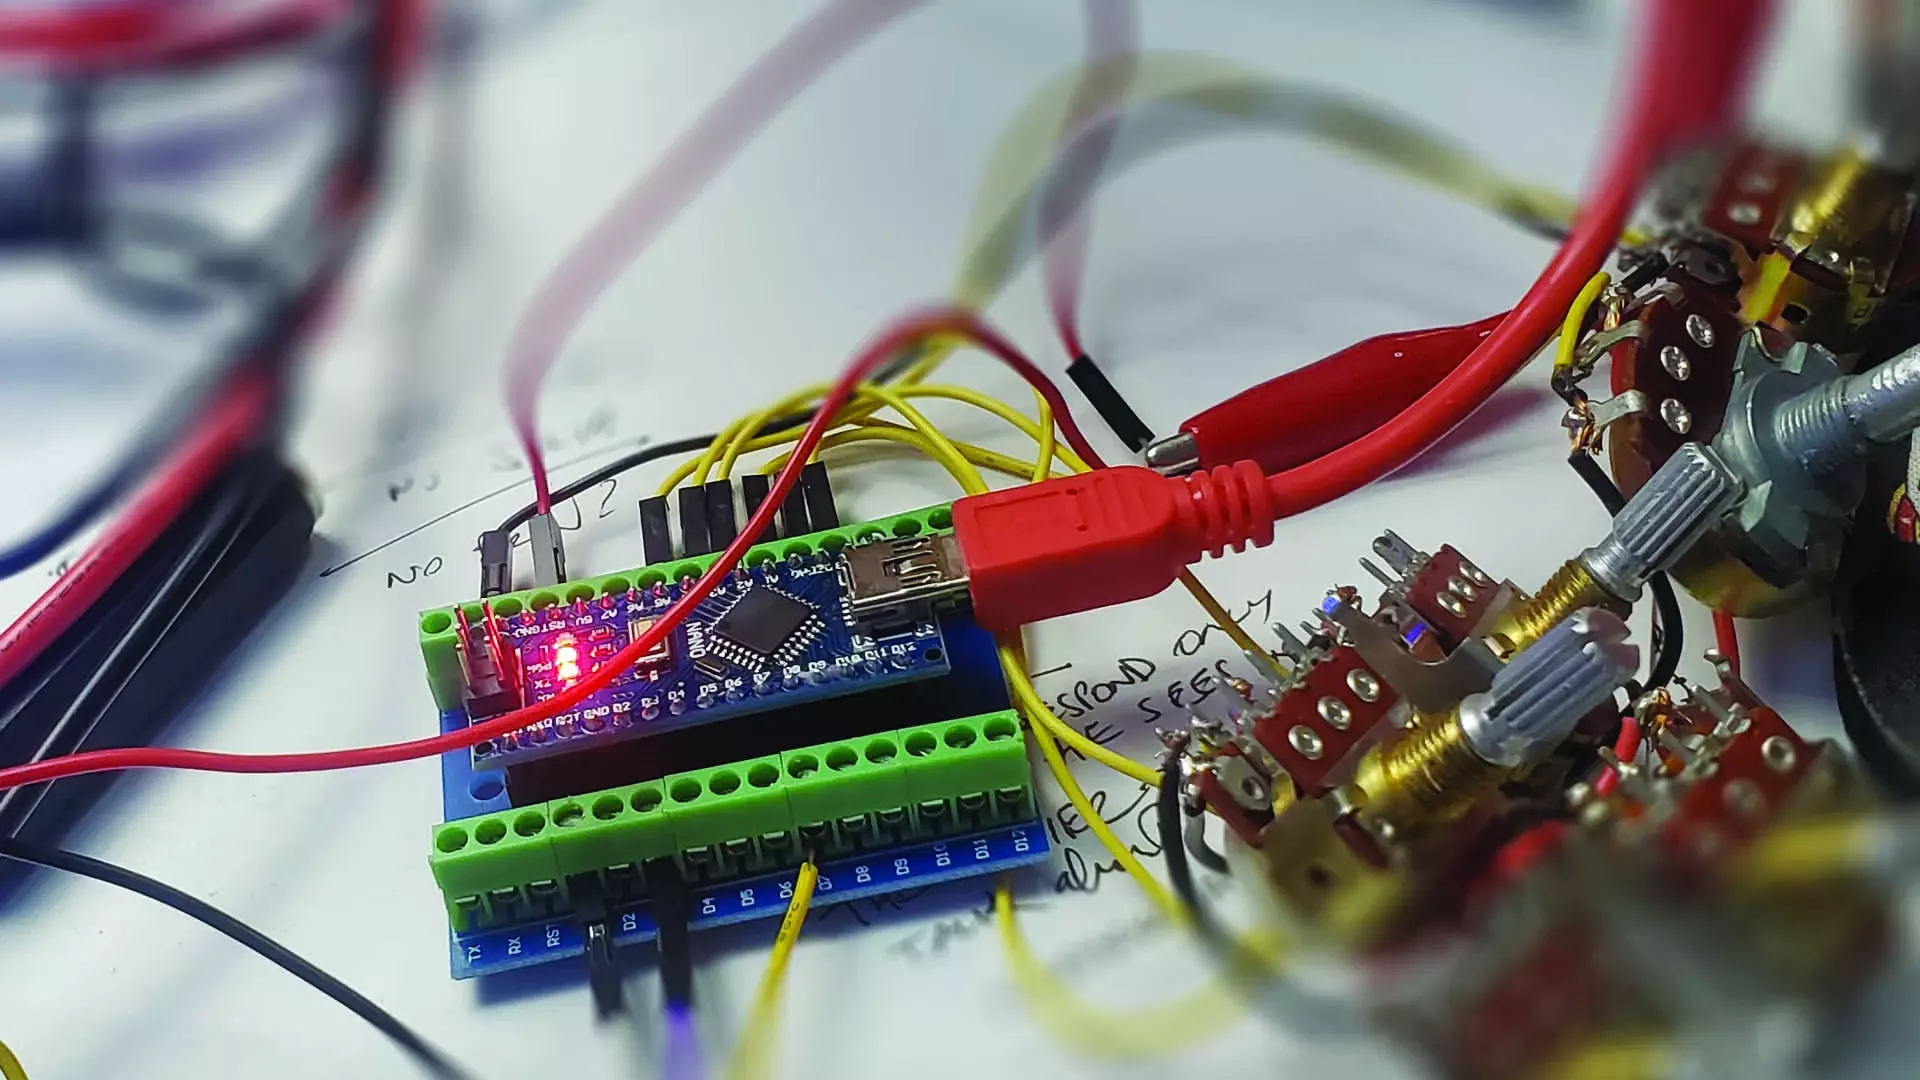 wires and circuits for digital fabrication